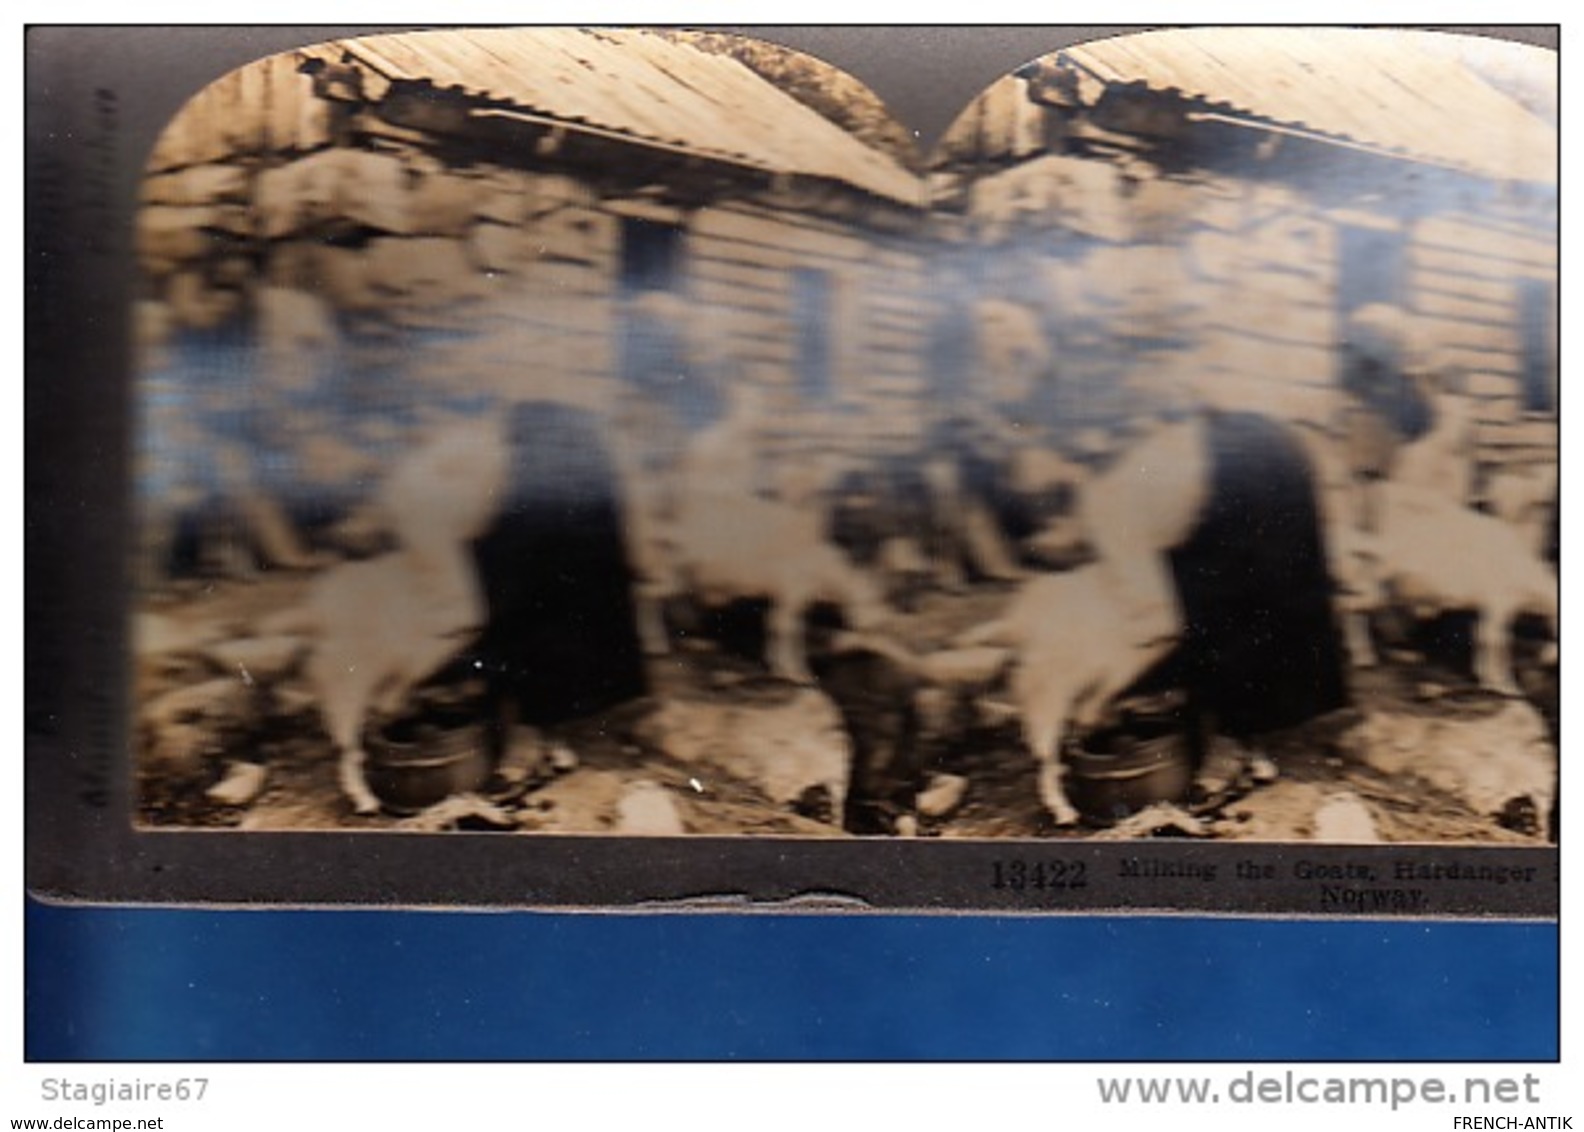 NORWAY MILKING THE GOATS HARDANGER TRAITE DES CHEVRES BELLE ANIMATION - Stereo-Photographie